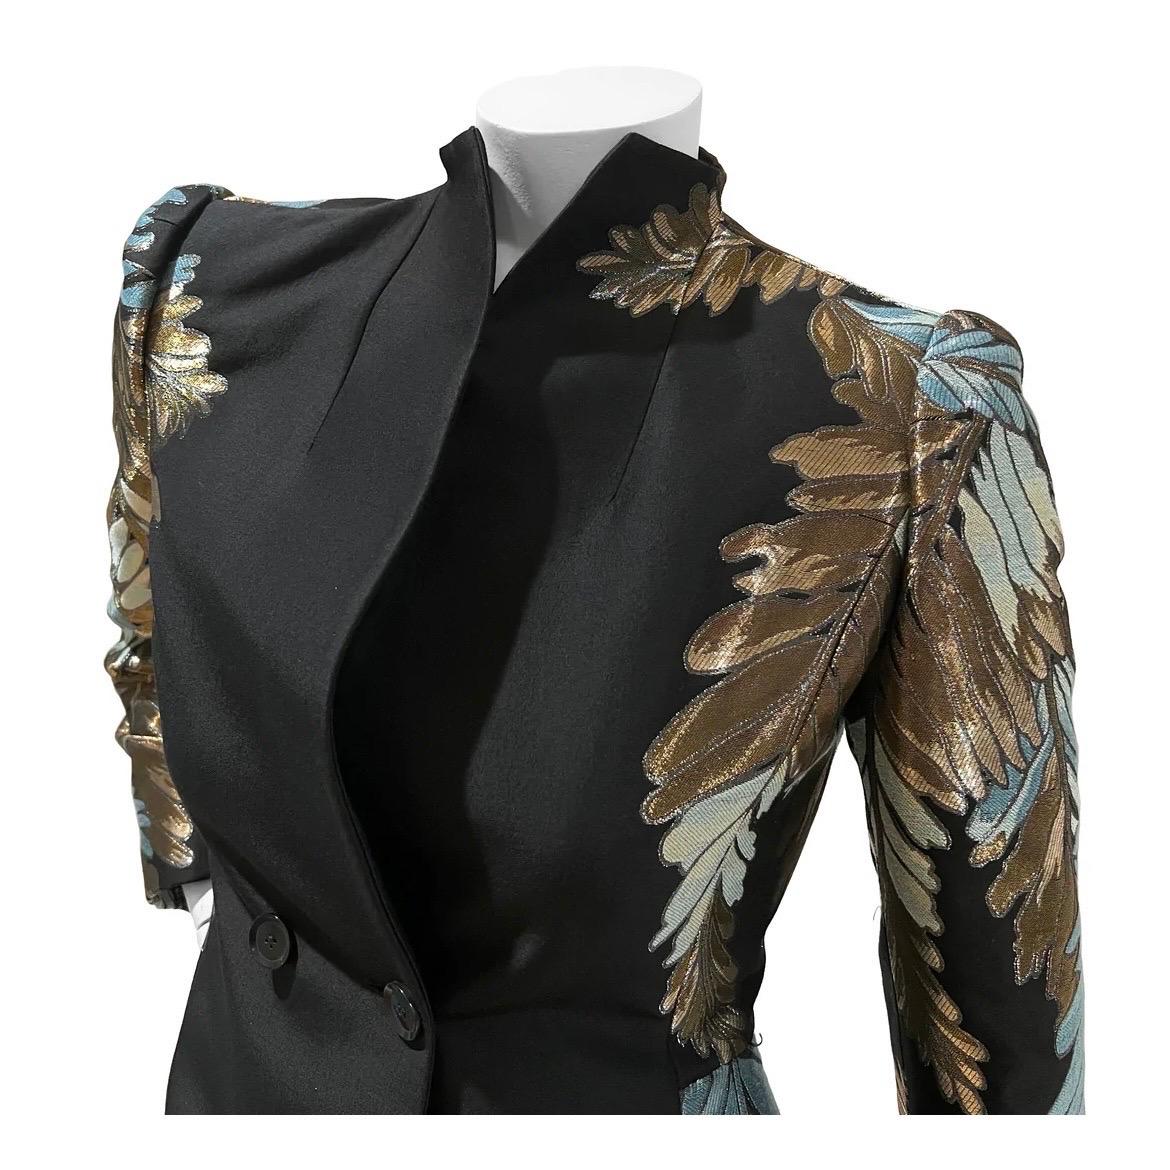 Gold Leaf Fitted Black Blazer by Gucci
Made in Italy 
Fall / Winter 2013
Black with gold and blue embellishment
Dual horizontal black Gucci button closure on front of blazer
Cuffs have four button detail
Fabric Composition; 35% Cotton, 20% Rayon,